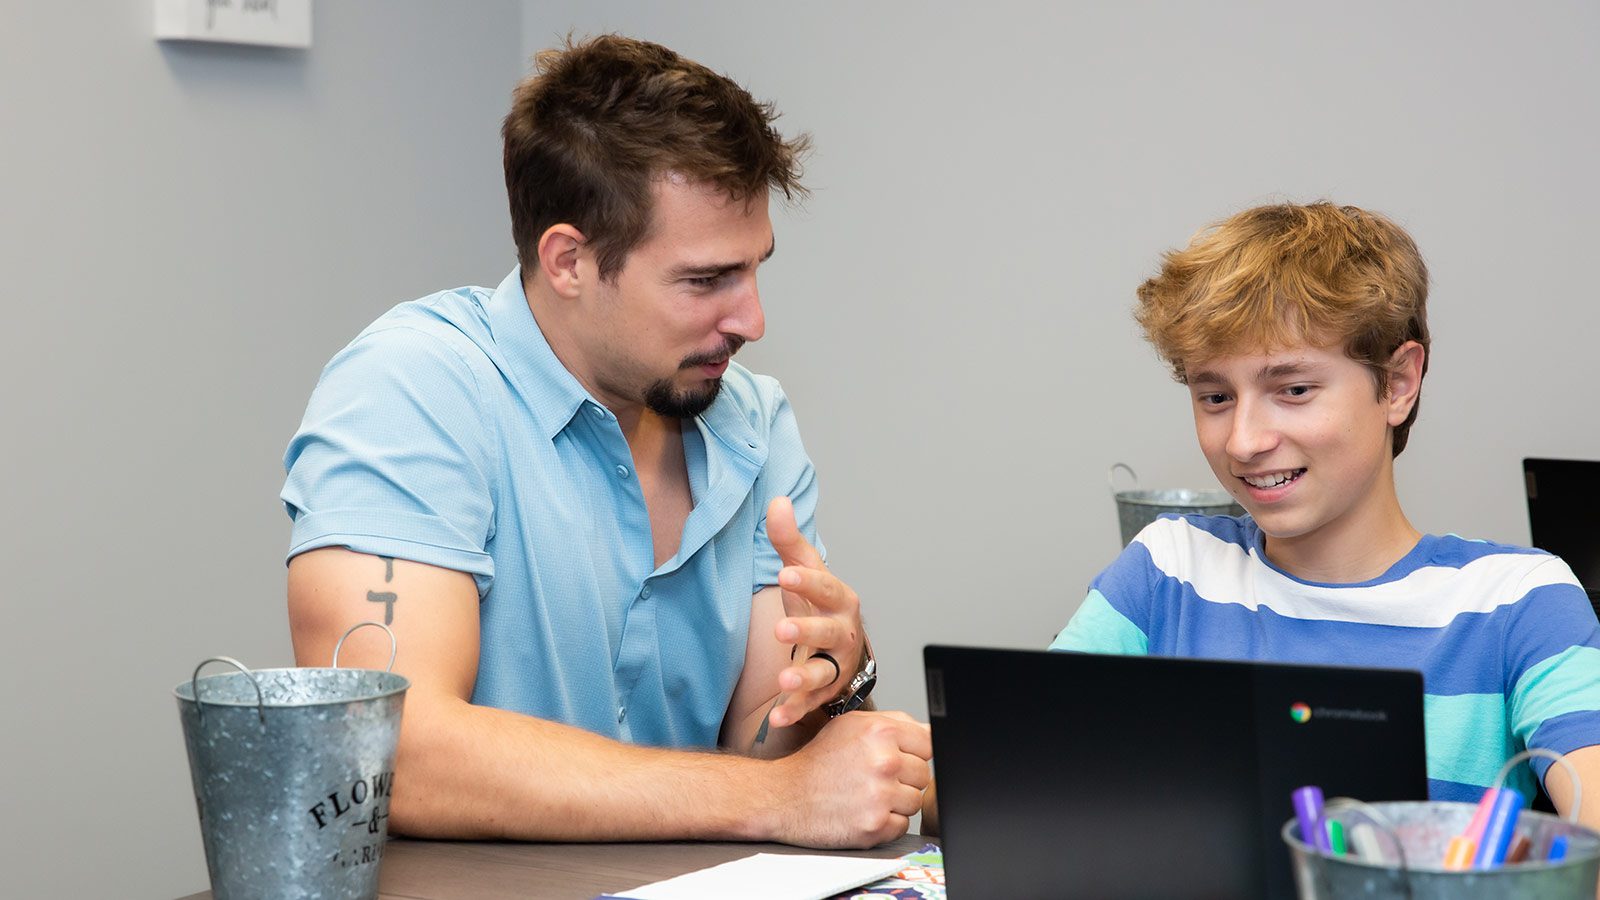 A man and teenage boy engaging in a one-on-one conversation across a desk with a laptop.